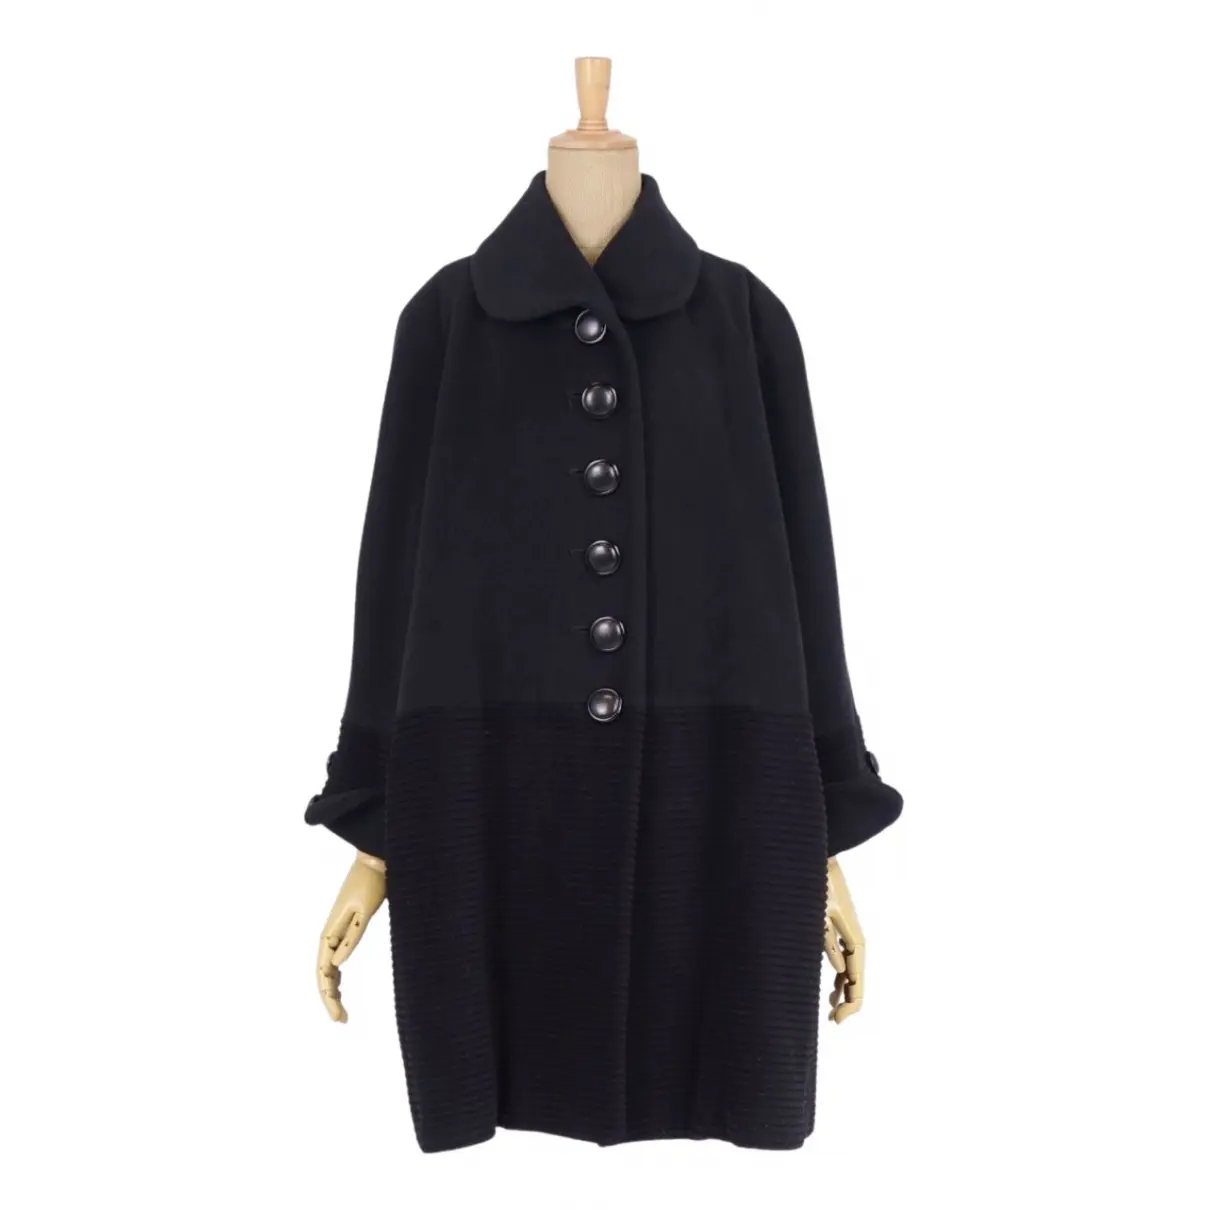 Wool trench coat Dior - Vintage